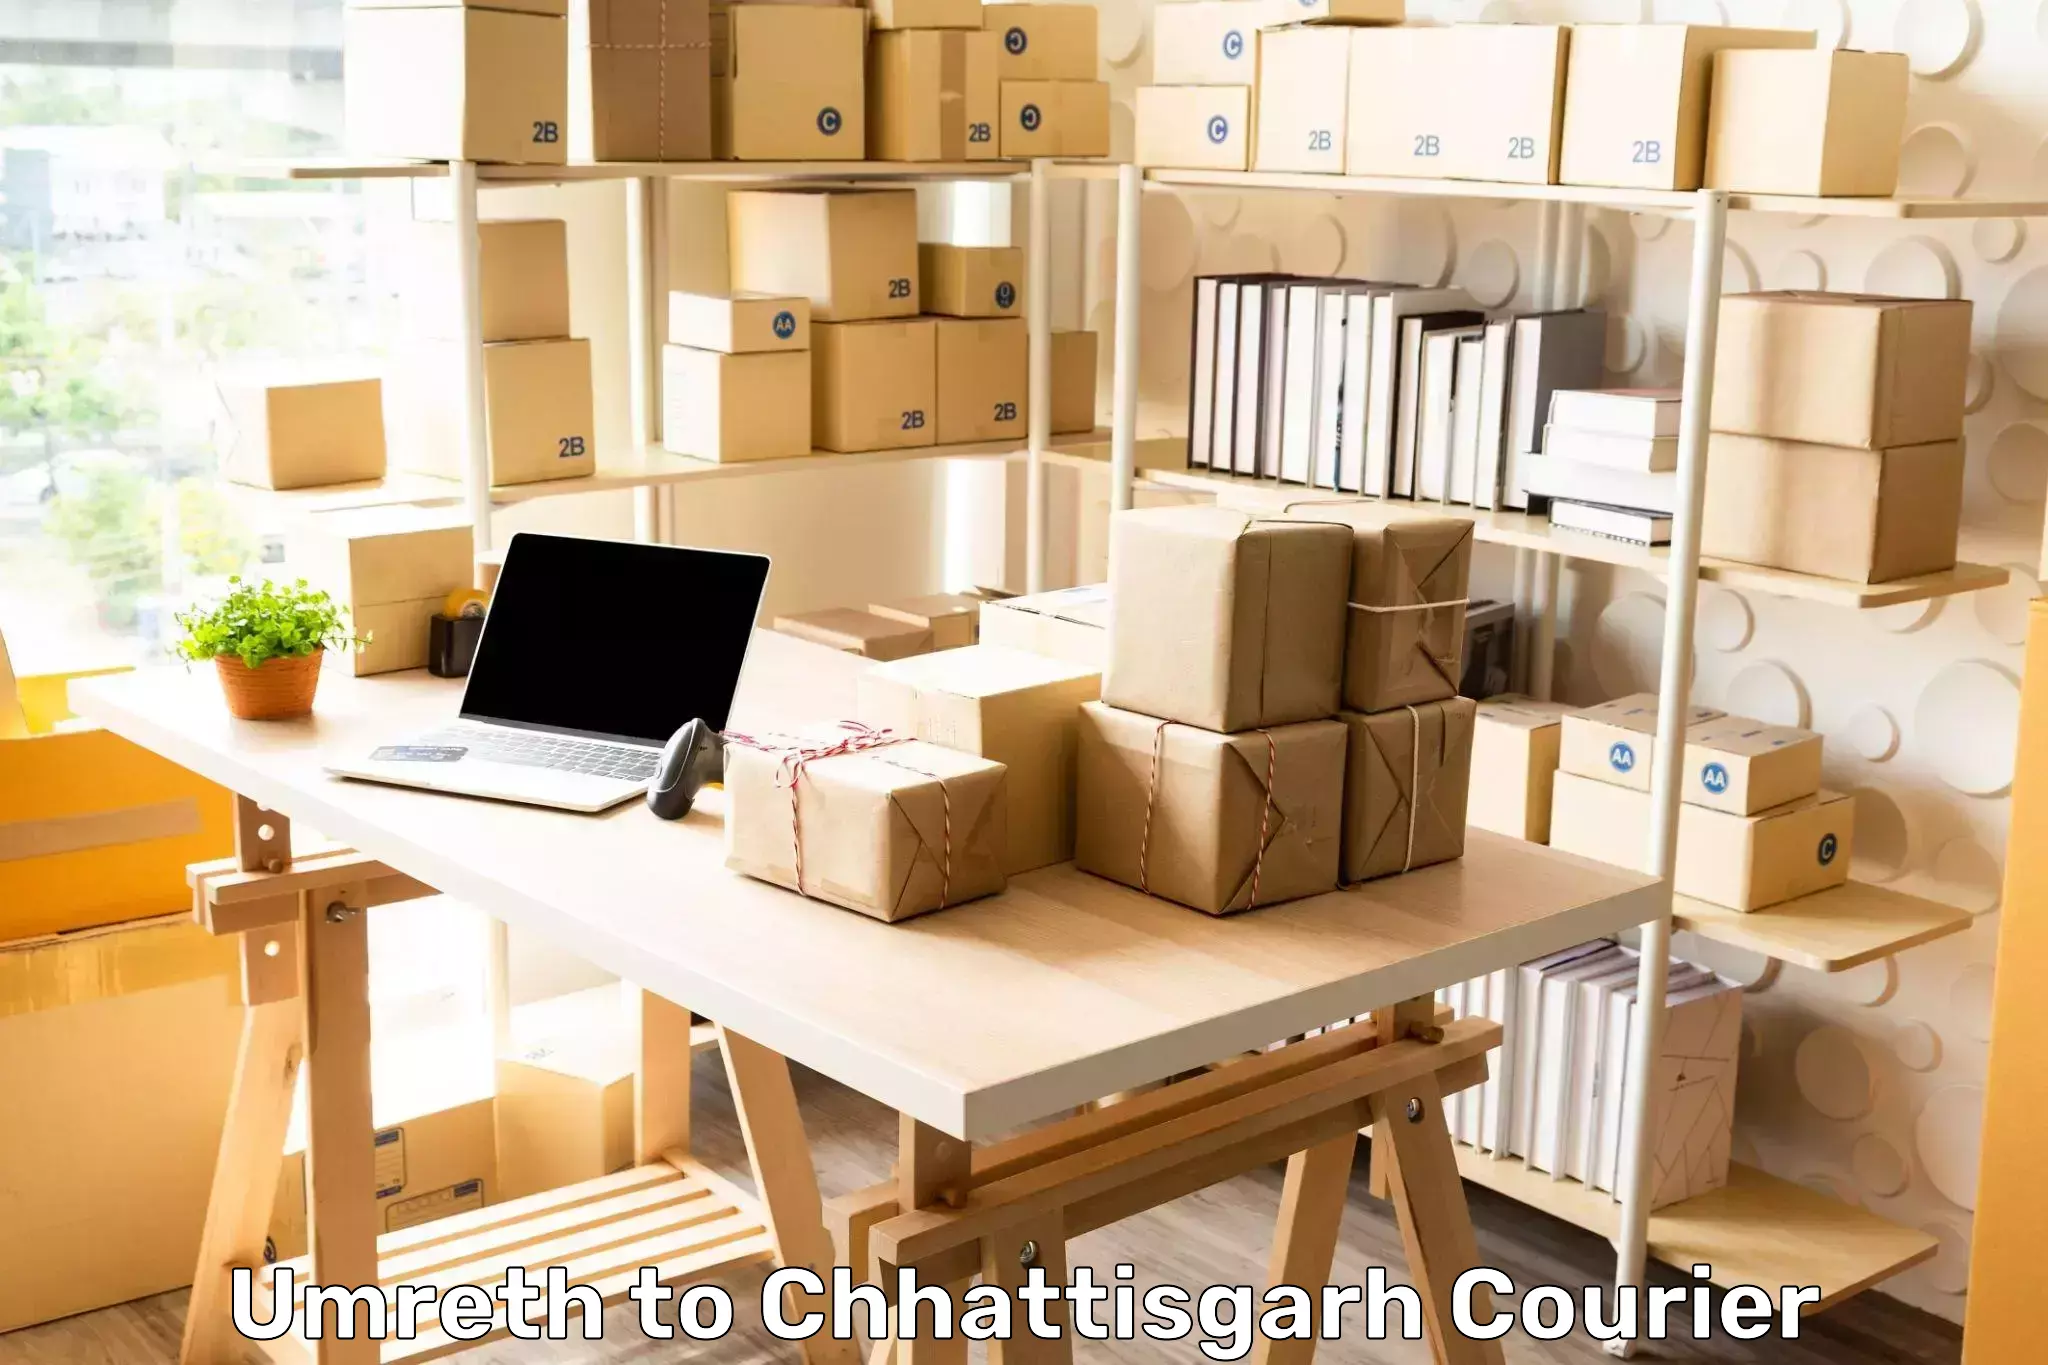 Overnight delivery services in Umreth to Chhattisgarh